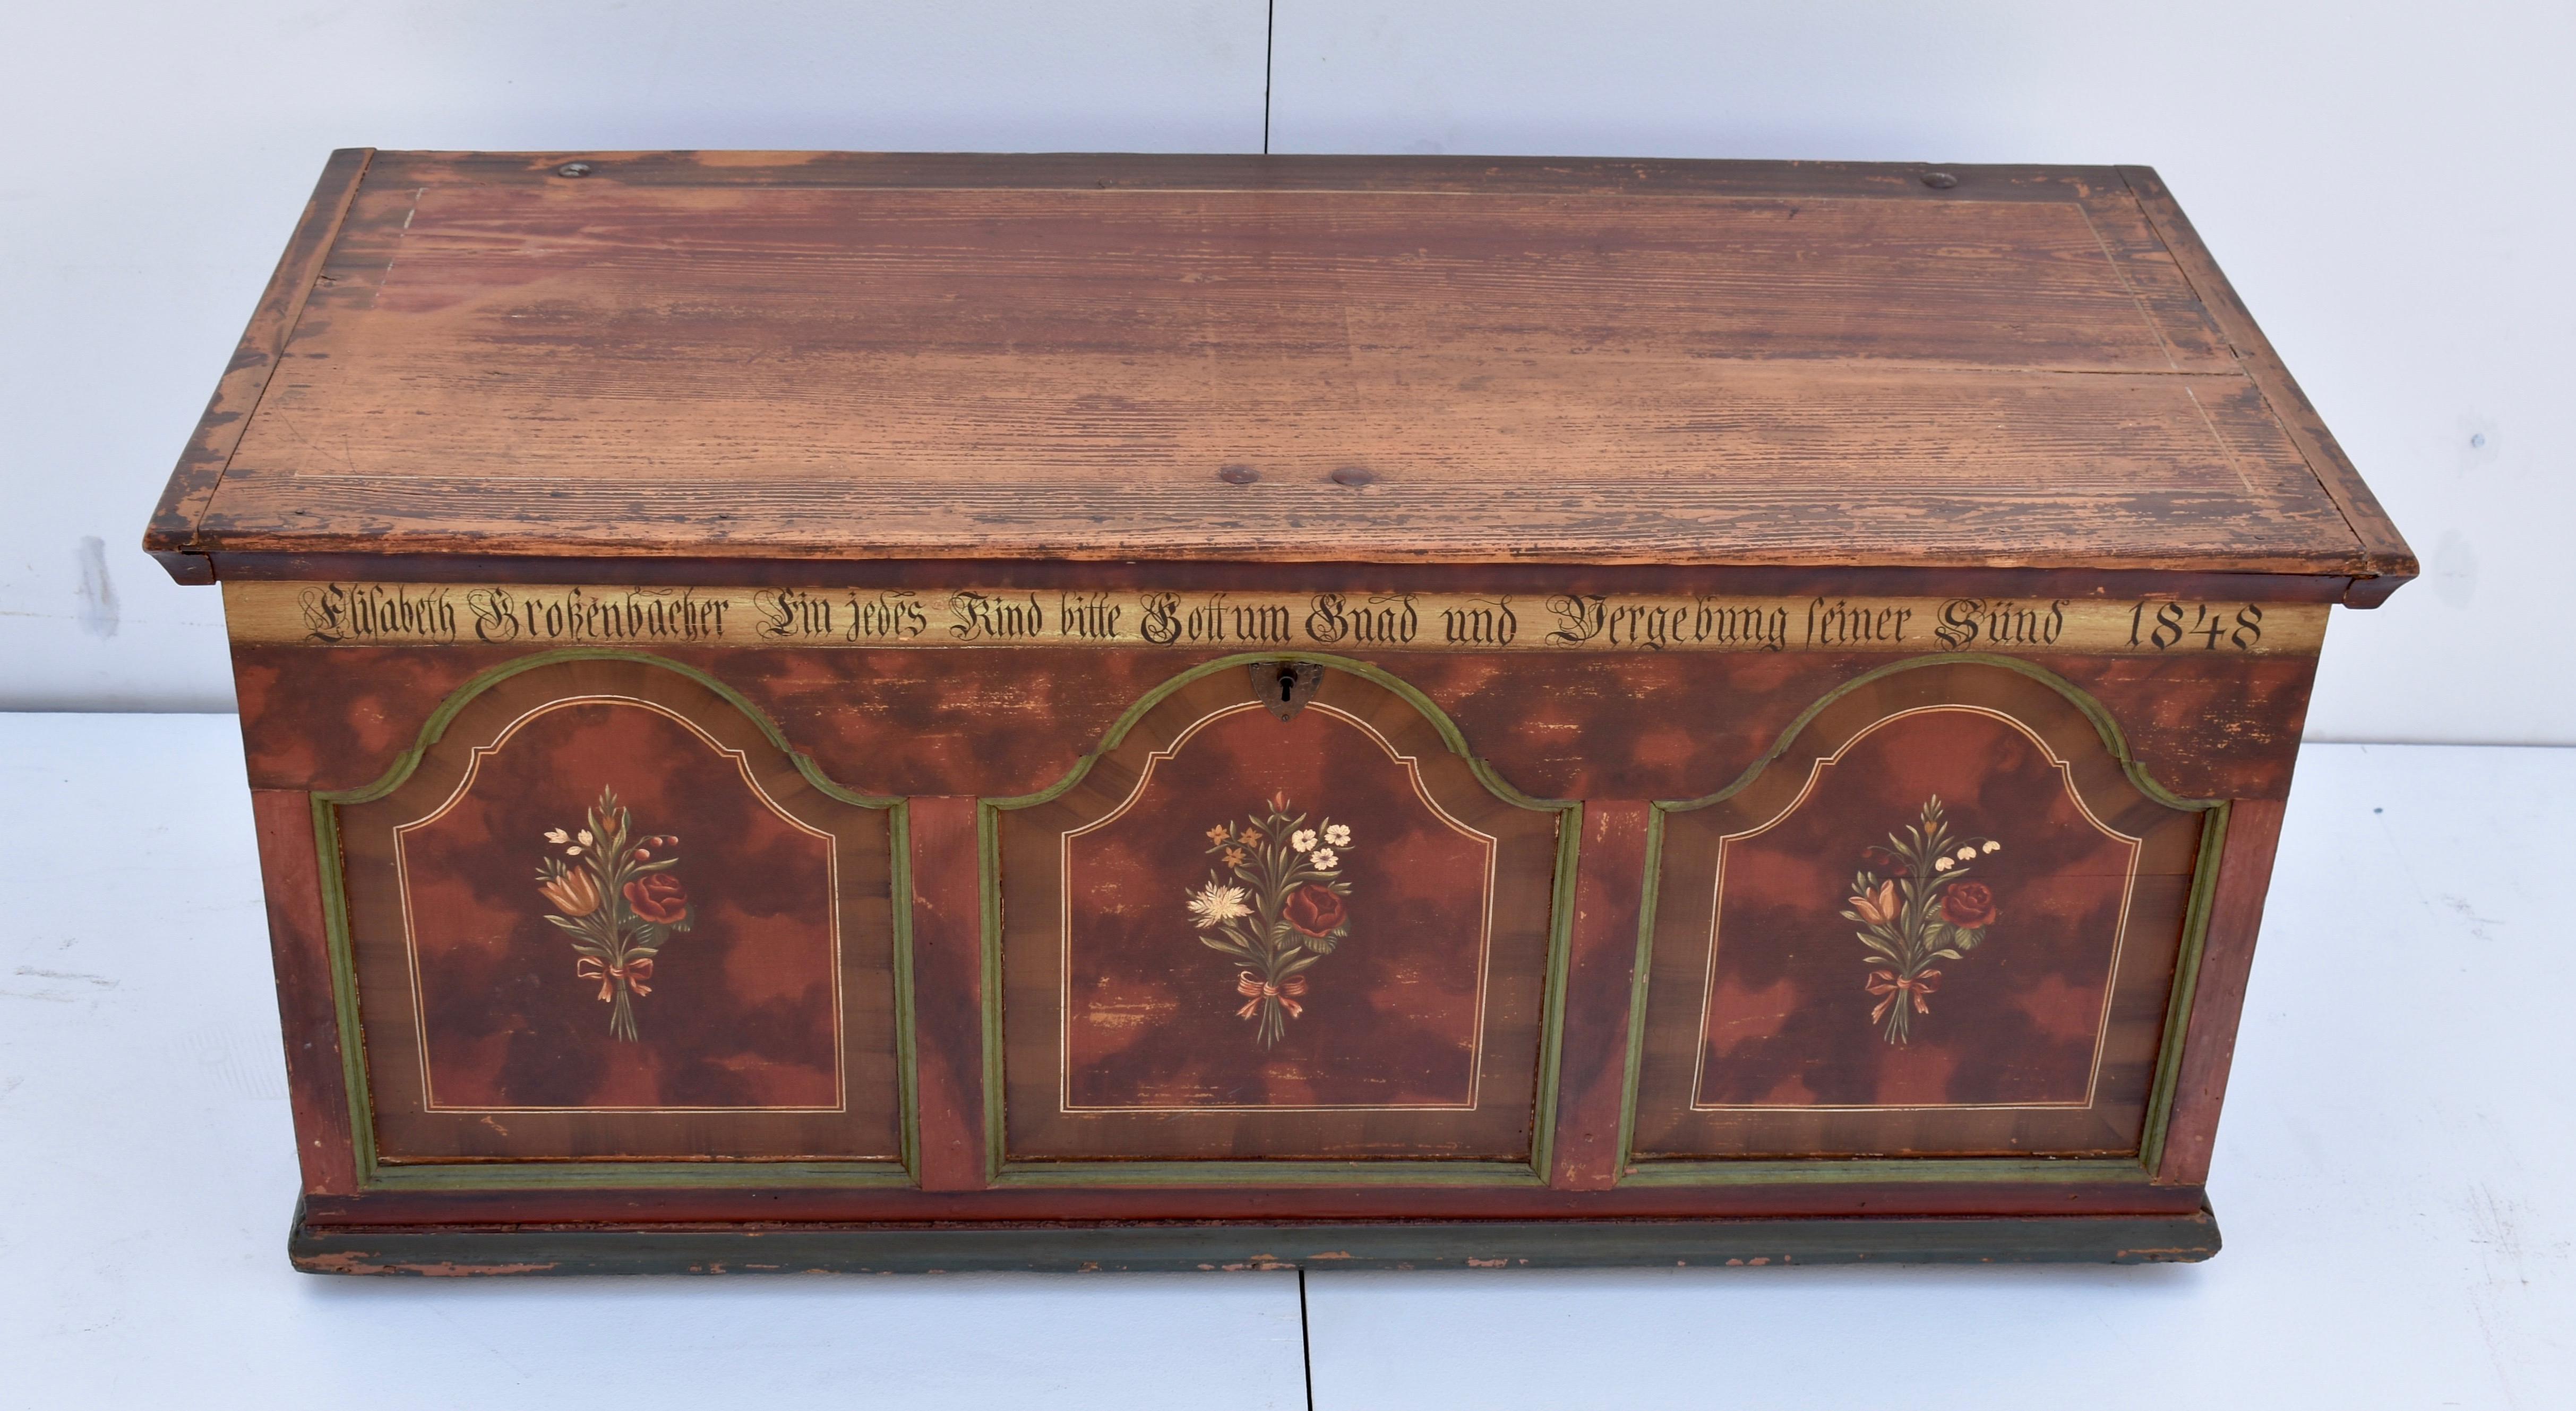 What a beautiful and interesting trunk, in original paint, from Germany. The front of the piece is sponged in shades of red and burgundy with three arched baroque-style panels, trimmed with green molding, equally spaced across the front. Inner faux